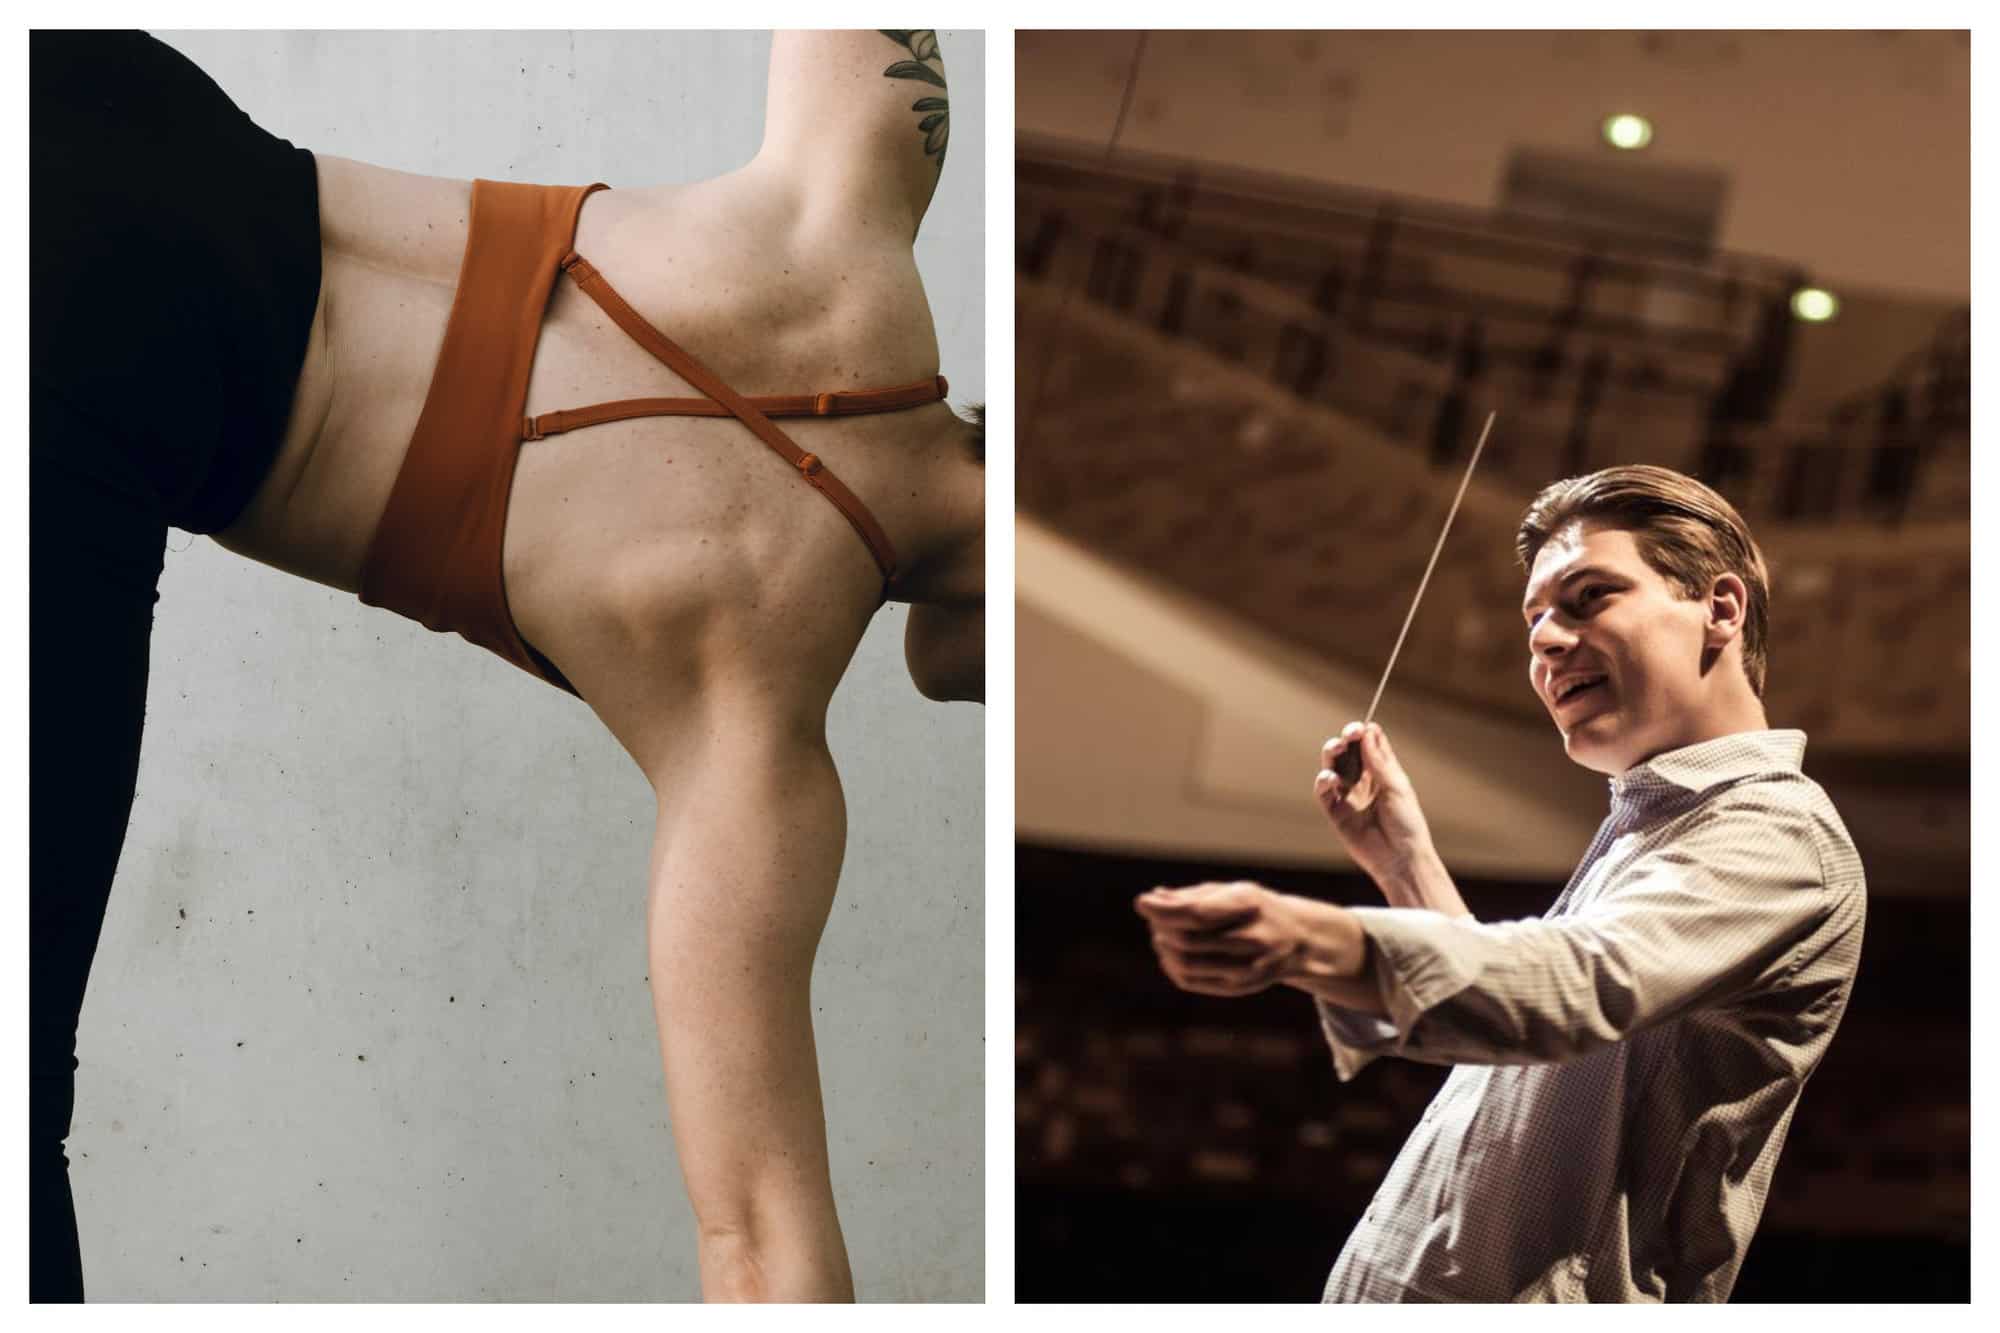 Left: view of a woman's back as she stretches. She is wearing a brown sports bra and black leggings and her right arm is reaching down as her left arm reaches up. Right: A man wearing a white shirt is holding a baton to instruct an orchestra. He is in a concert hall.